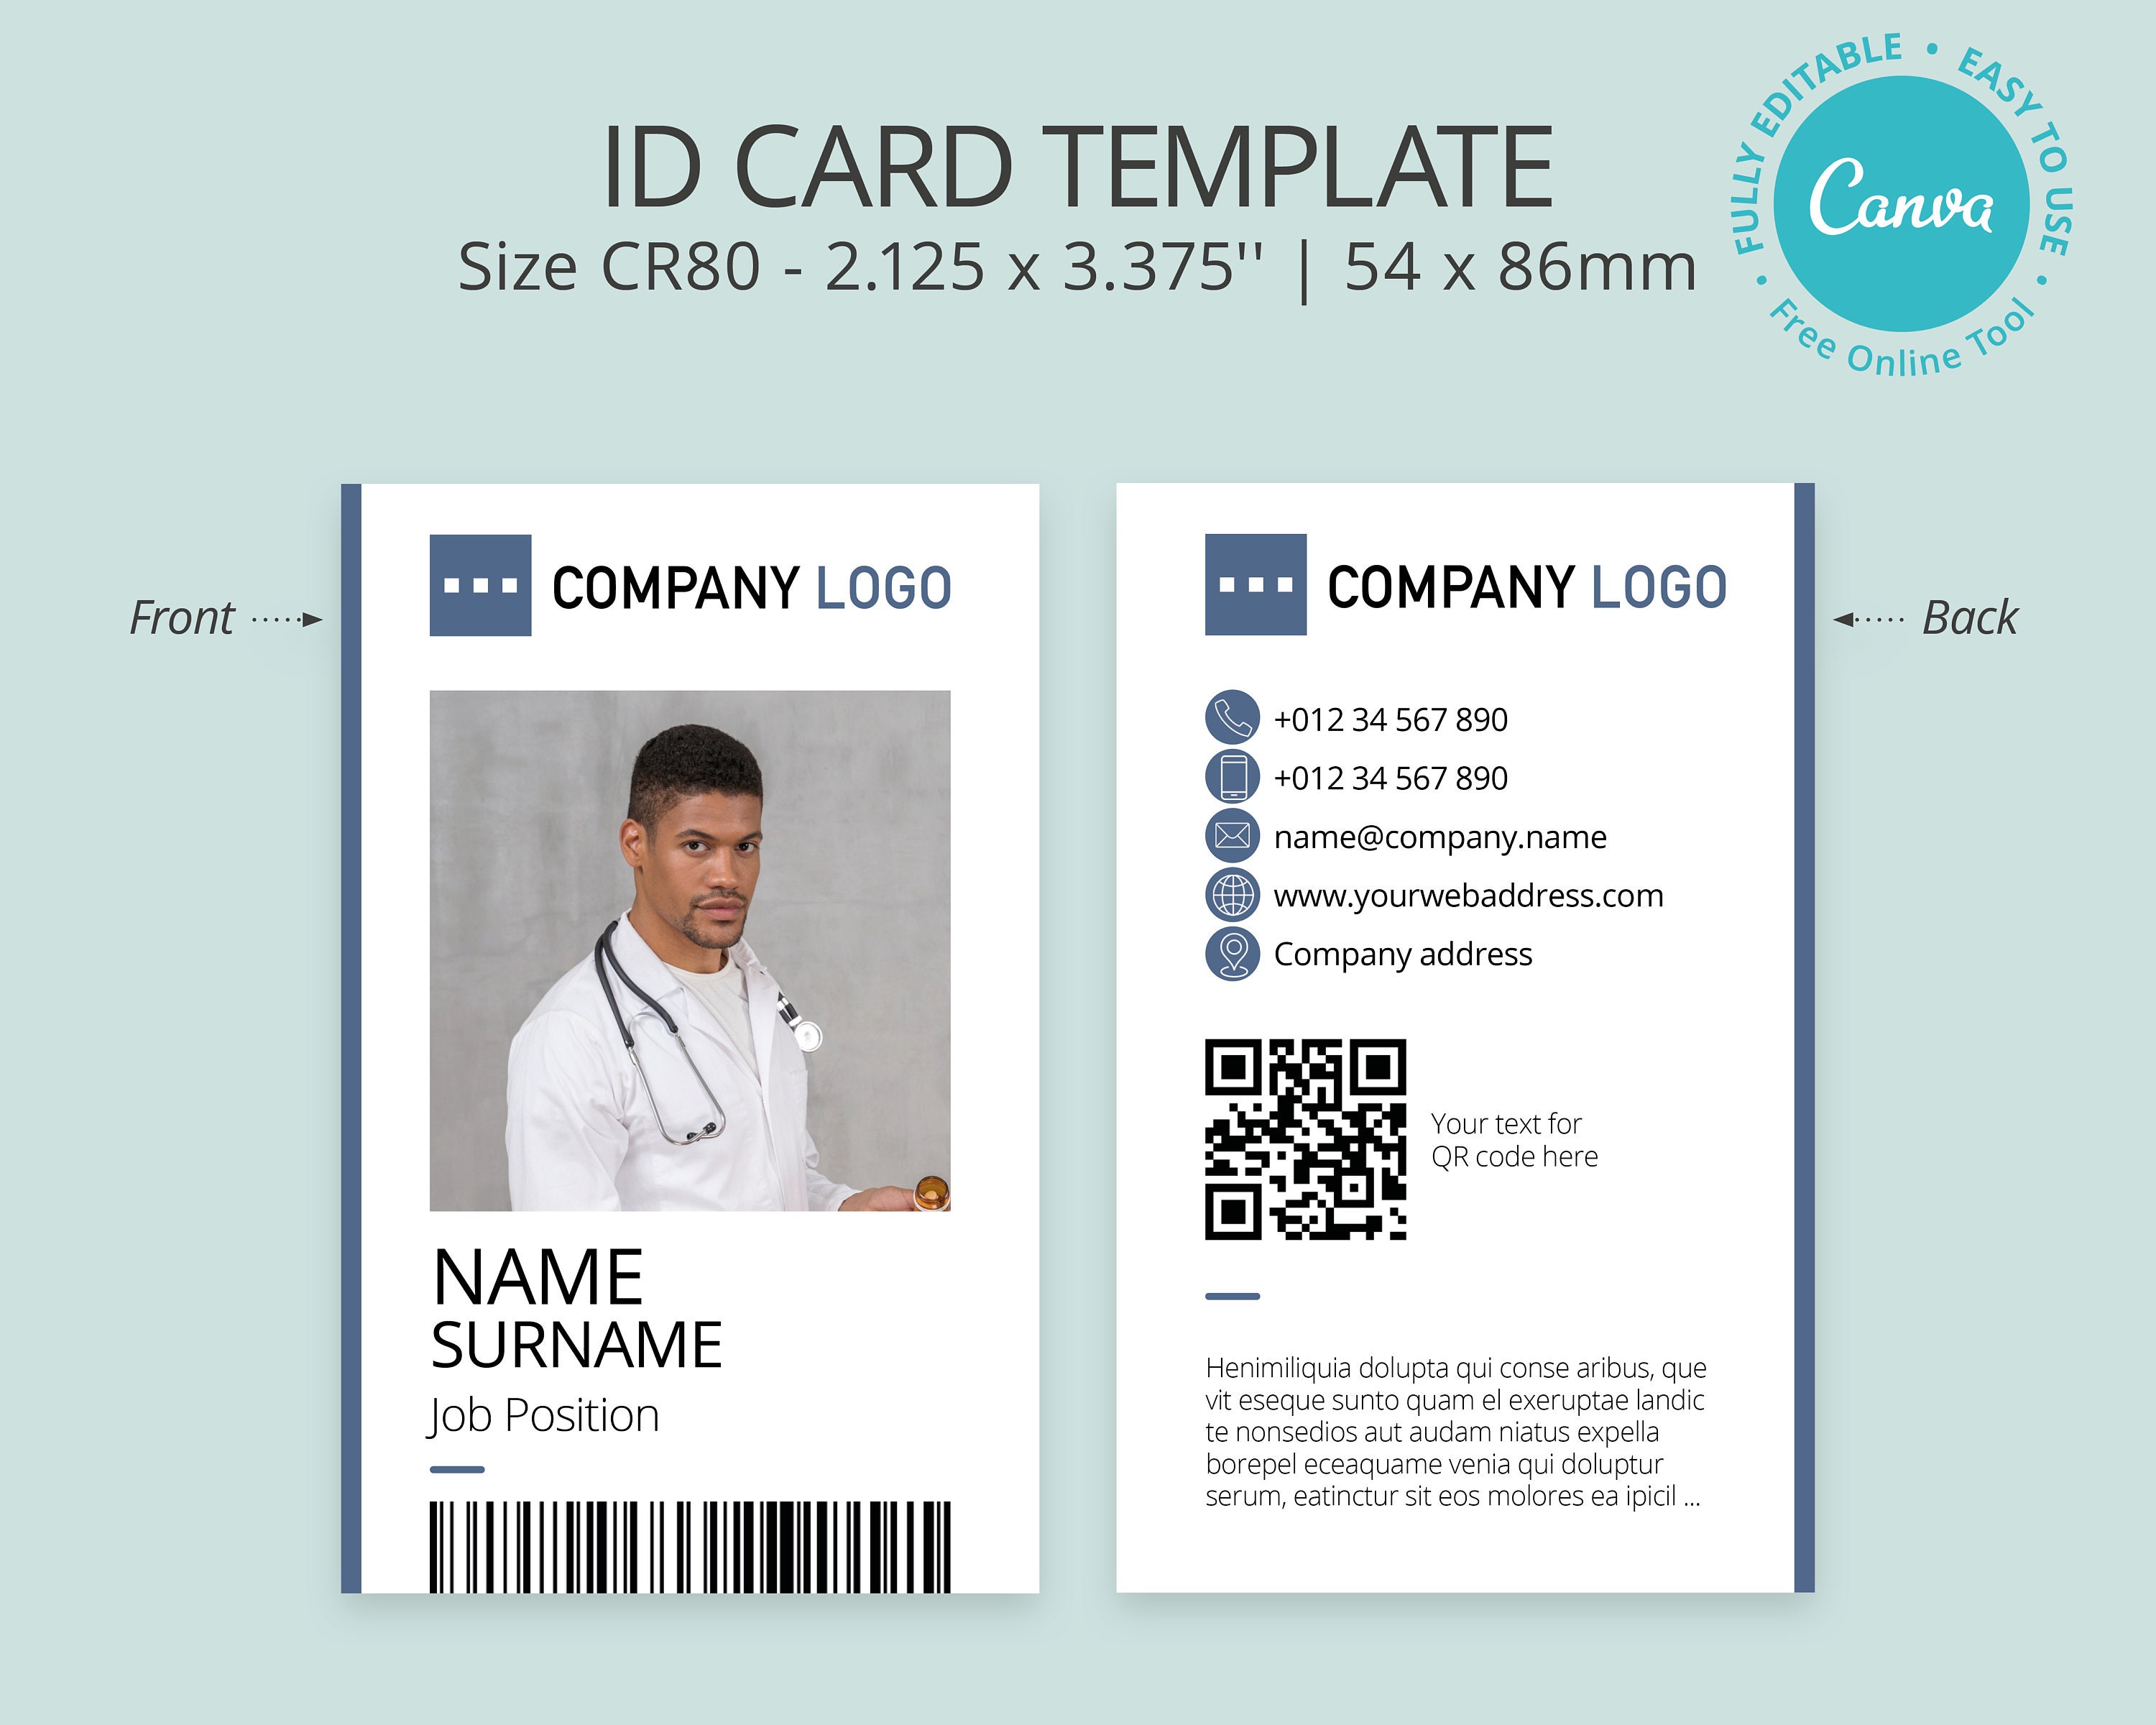 Editable Photo ID Card Template, Printable ID Badge, Canva Template,  Corporate, Employee, Student ID Card, Clean Minimalist Name Card, CR80 -   Norway